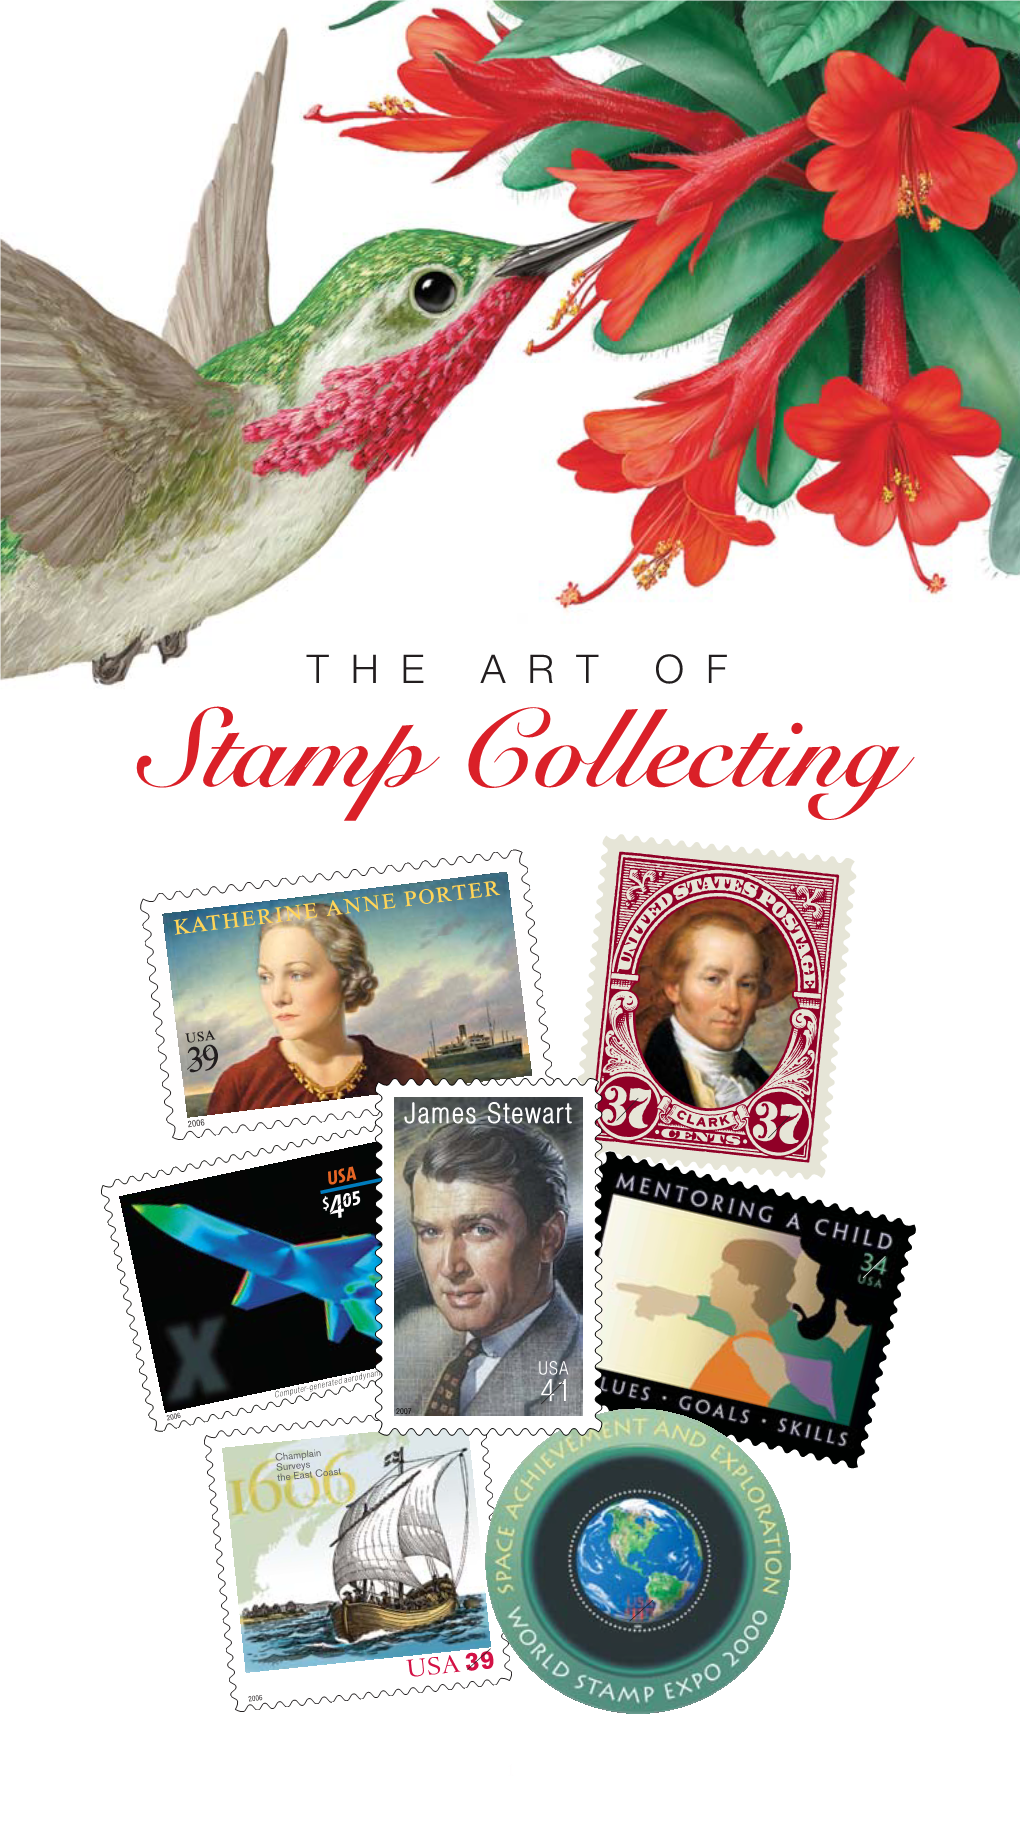 ART of Stamp Collecting